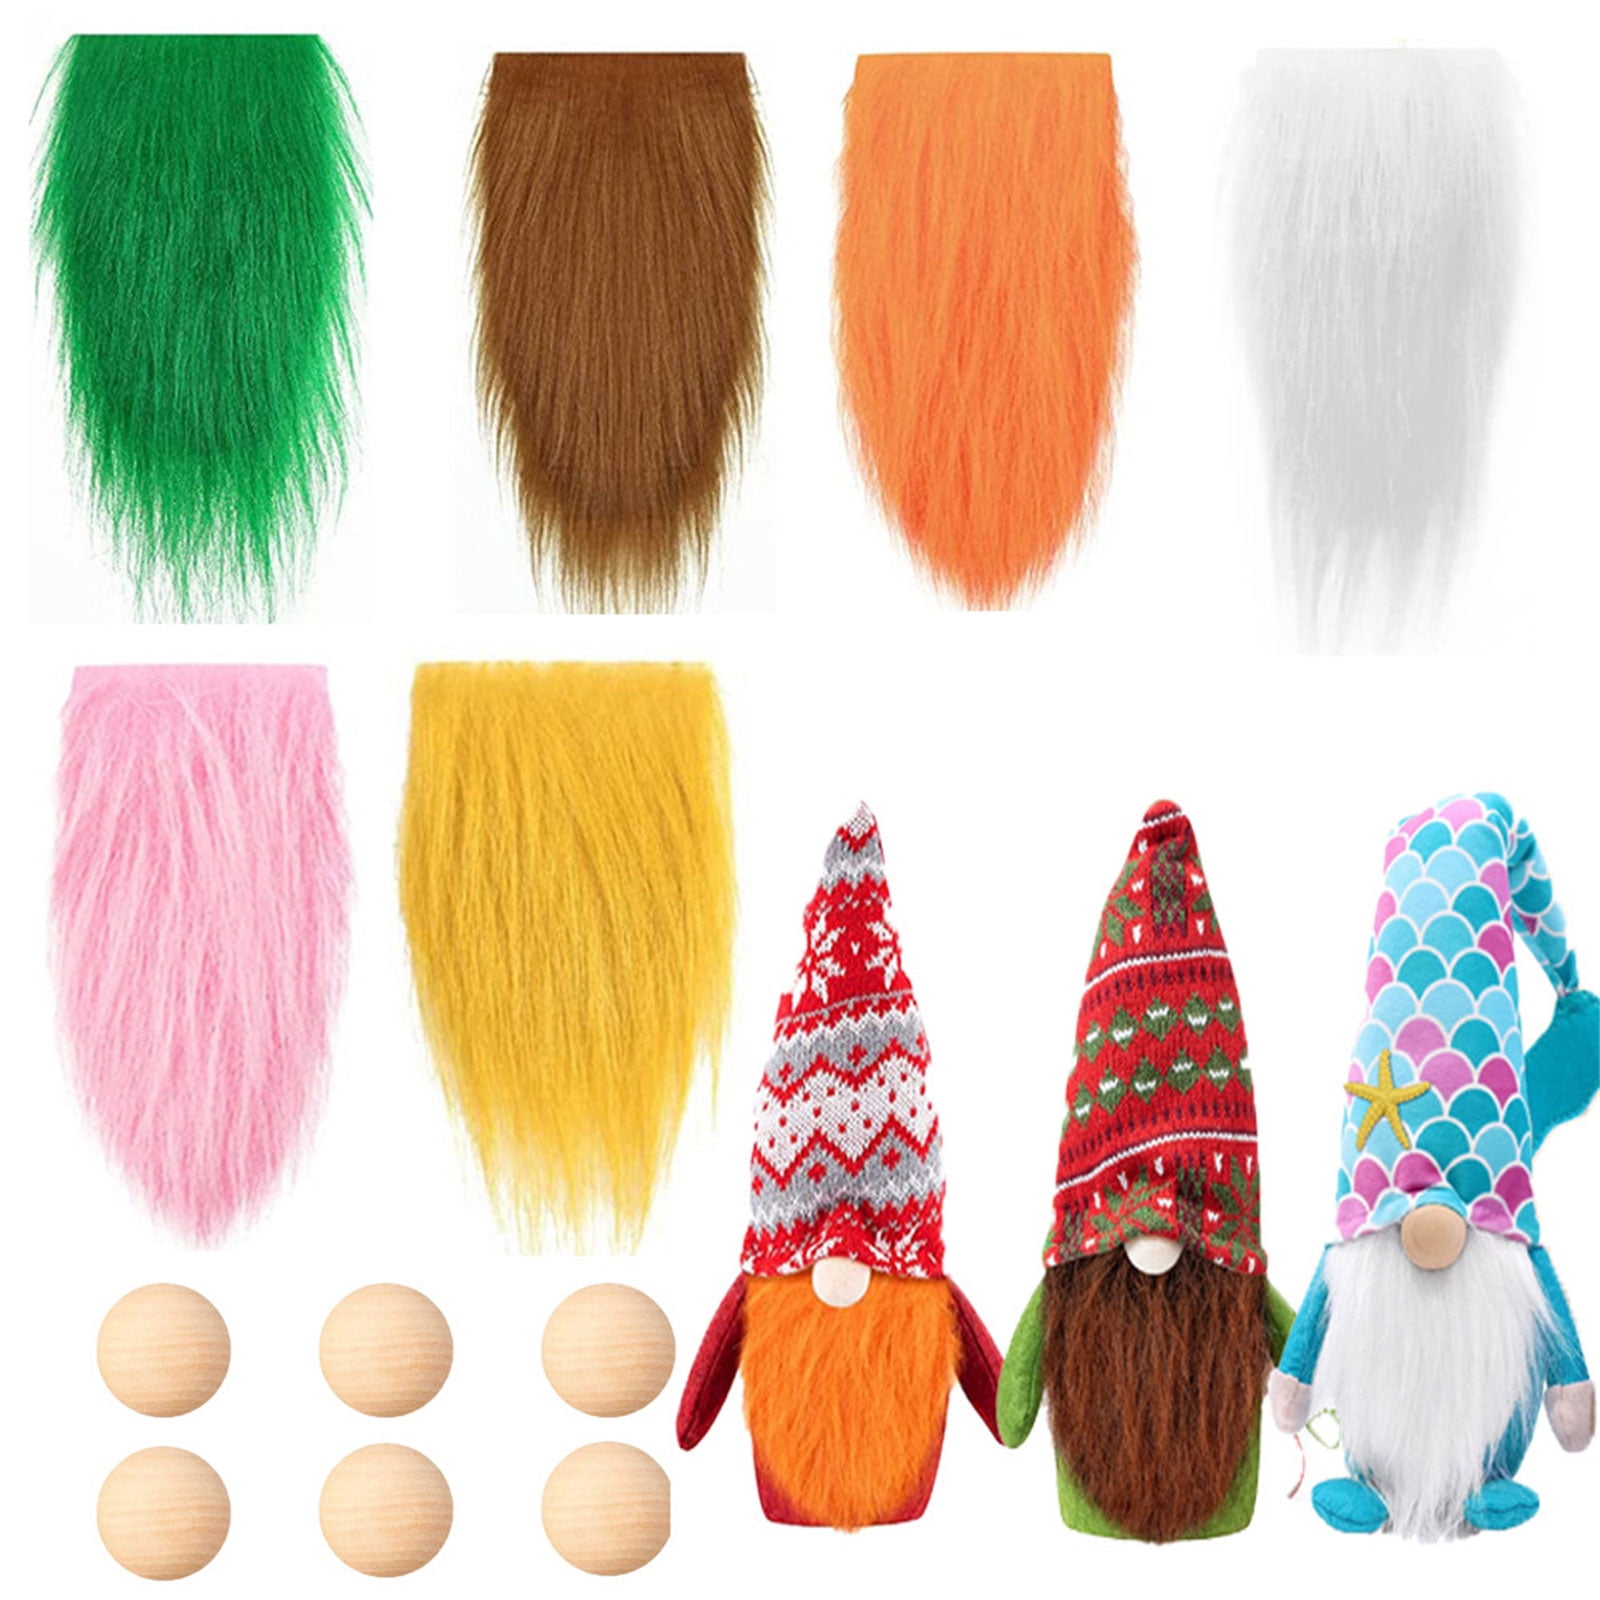 15 Pcs Gnome Beards for Crafting Easter Day Faux Fur Fabric Precut Gnomes Beards